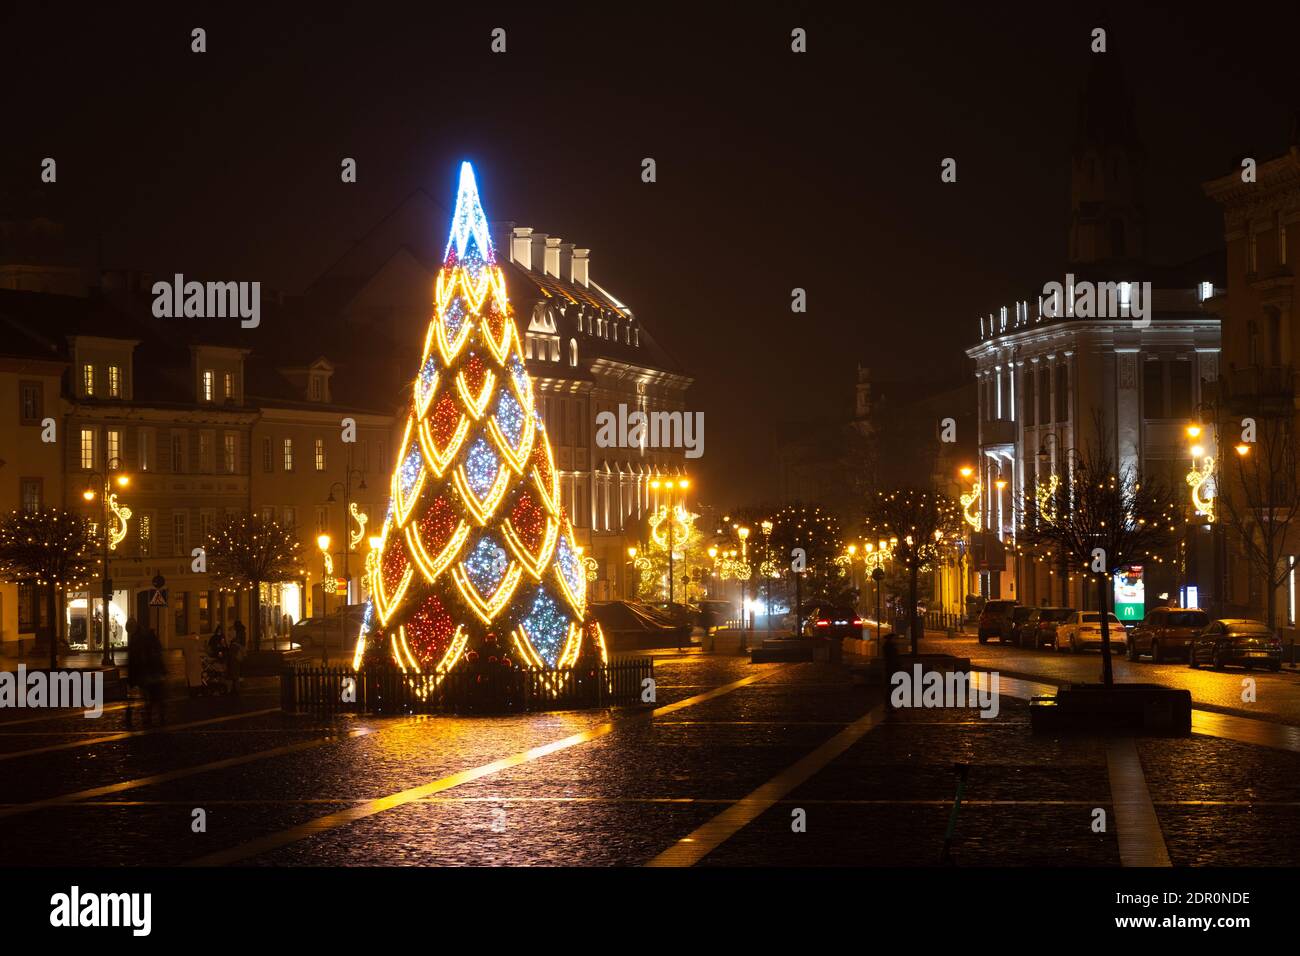 Vilnius Town Hall, Lithuania, Vilnius rotuse with Christmas tree and decorations, night Stock Photo